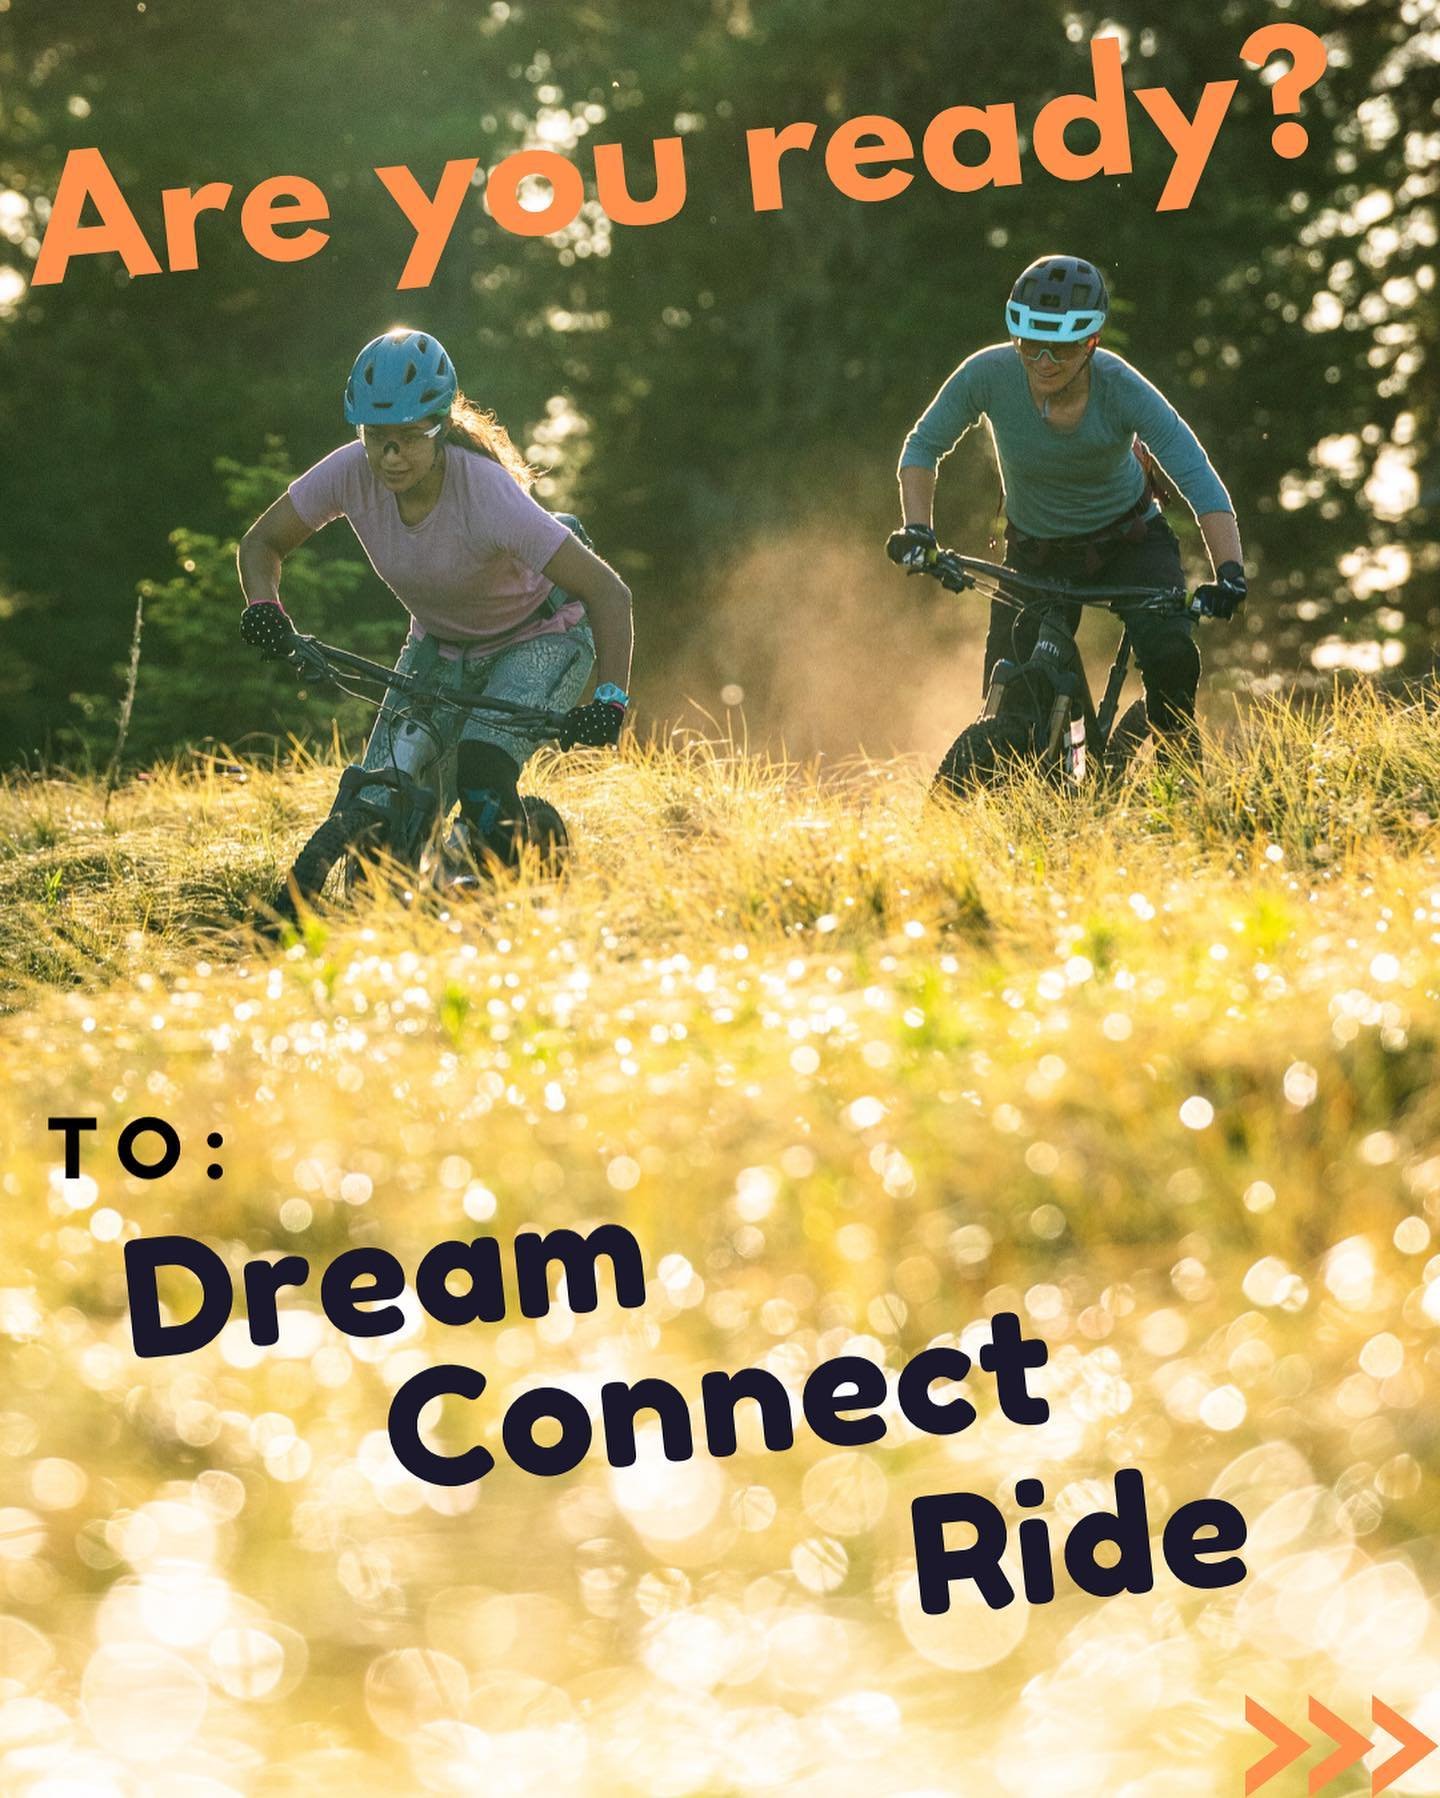 Are your days dedicated to:

🔷 The spouse
🔷 The job
🔷 The kids
🔷 The pets&hellip;

When are you prioritizing YOU? 

💥Your time.
💥 Your needs.
💥 Your dreams. 

Are you ready, to prioritize your time?

Come spend 4 magical days to ride your bike